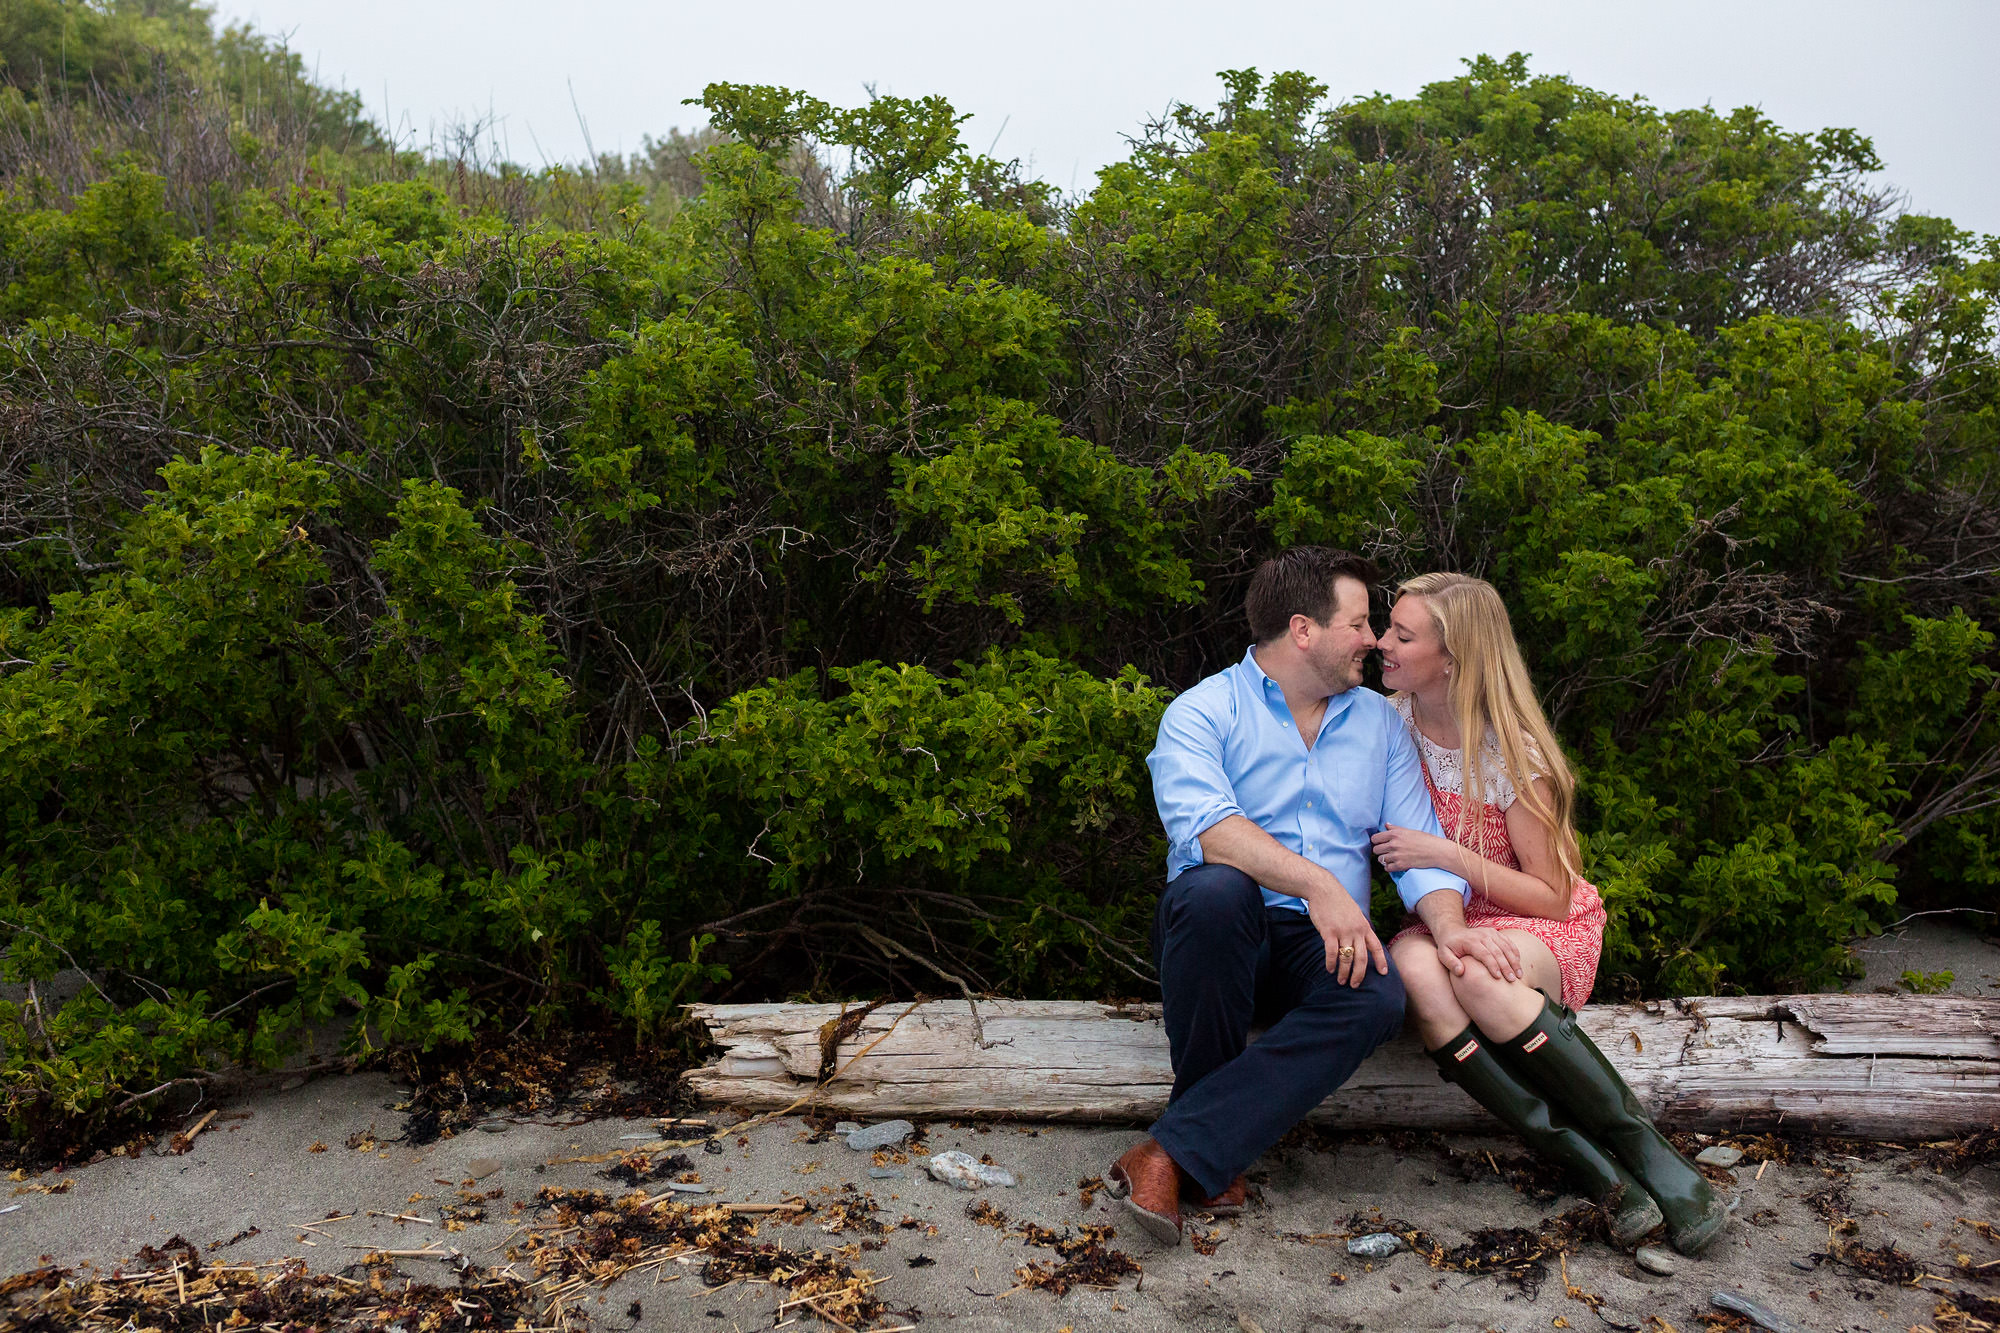 Engagement photography in Cape Elizabeth, Maine